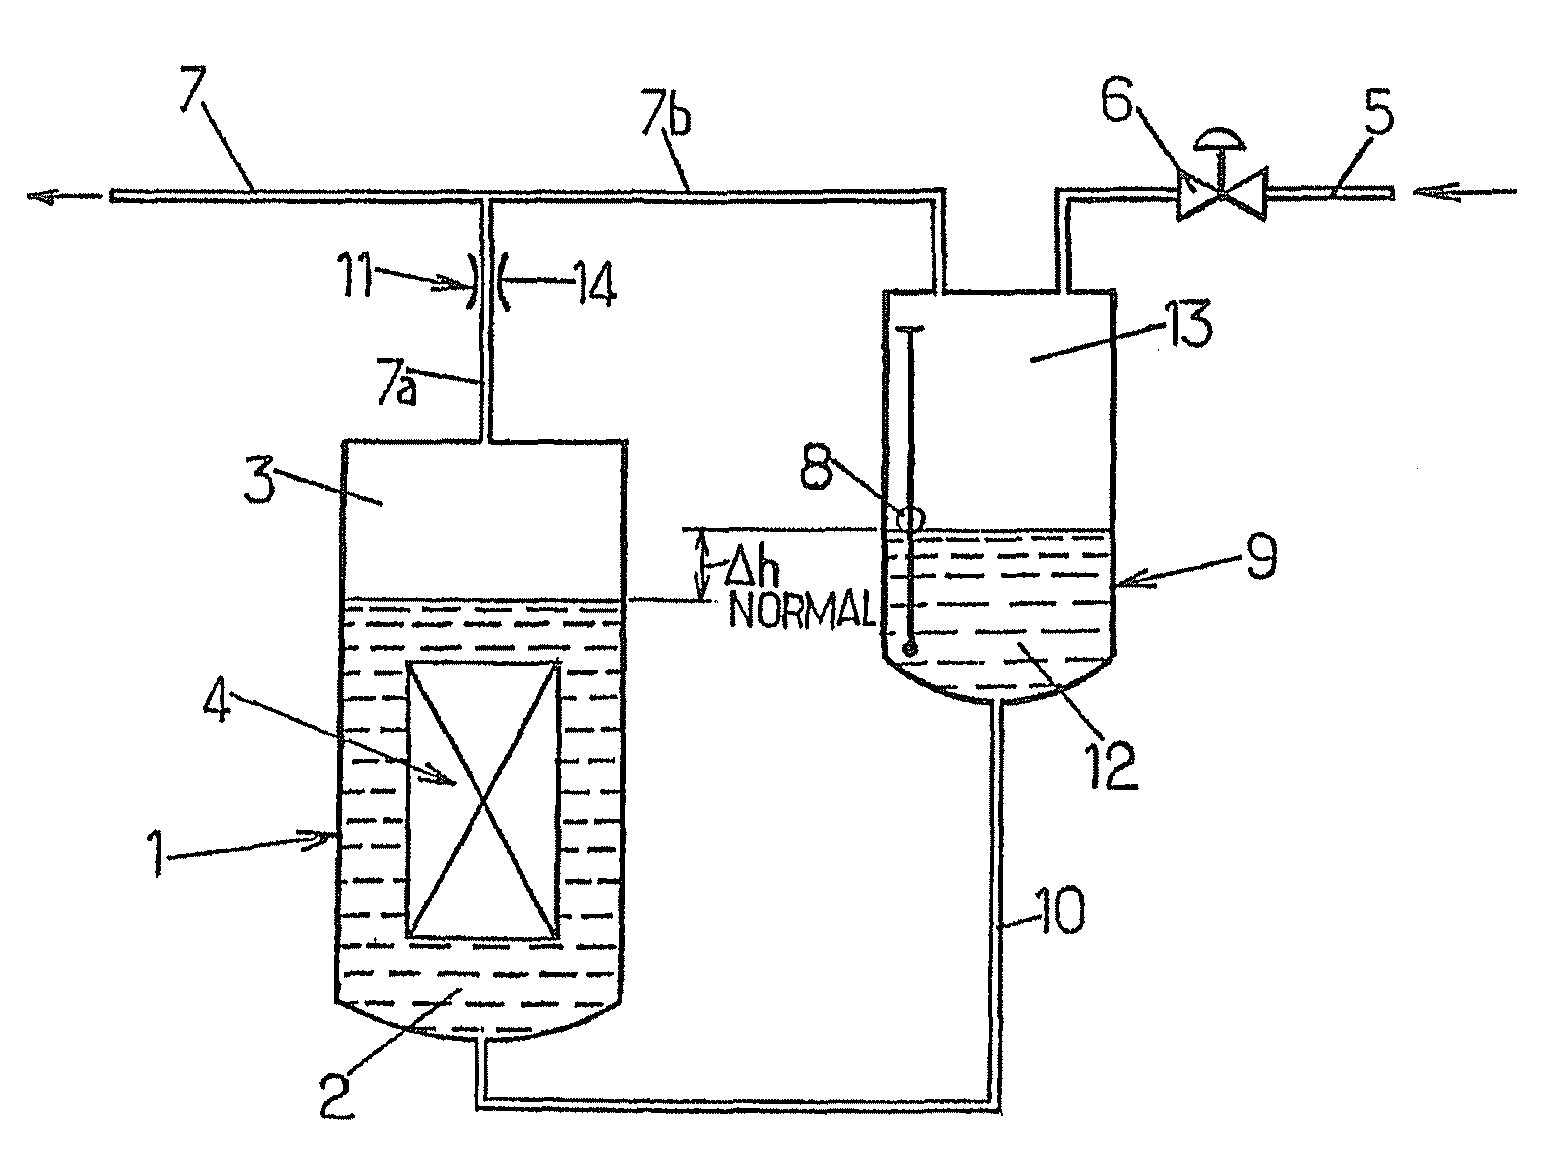 Installation for cryogenic cooling for superconductor device